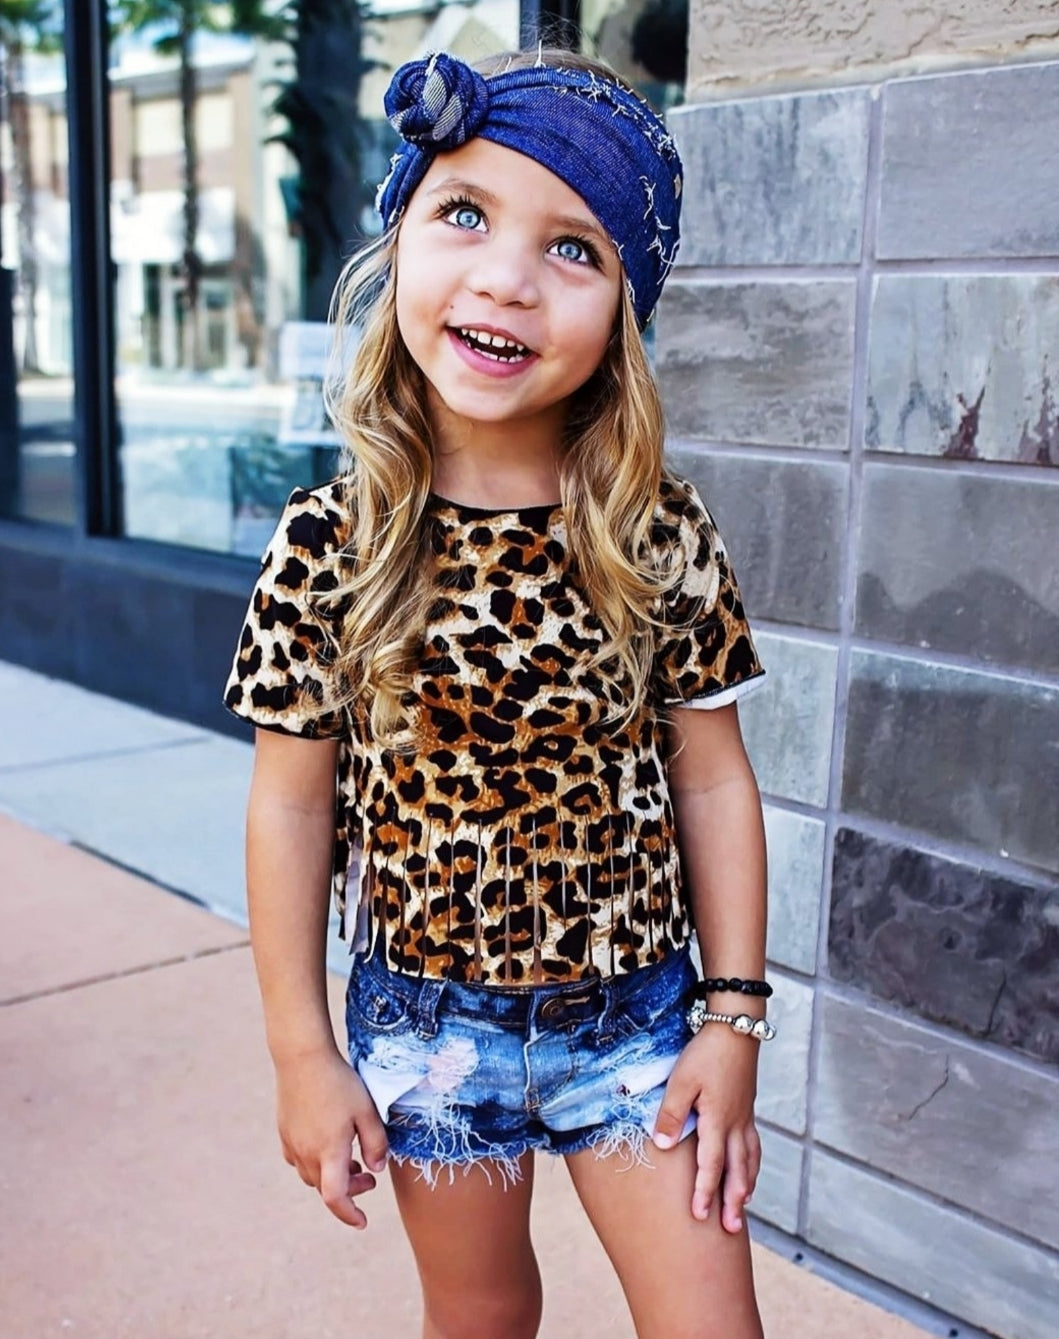 Ready to Ship Fringe Leopard Crop Tee